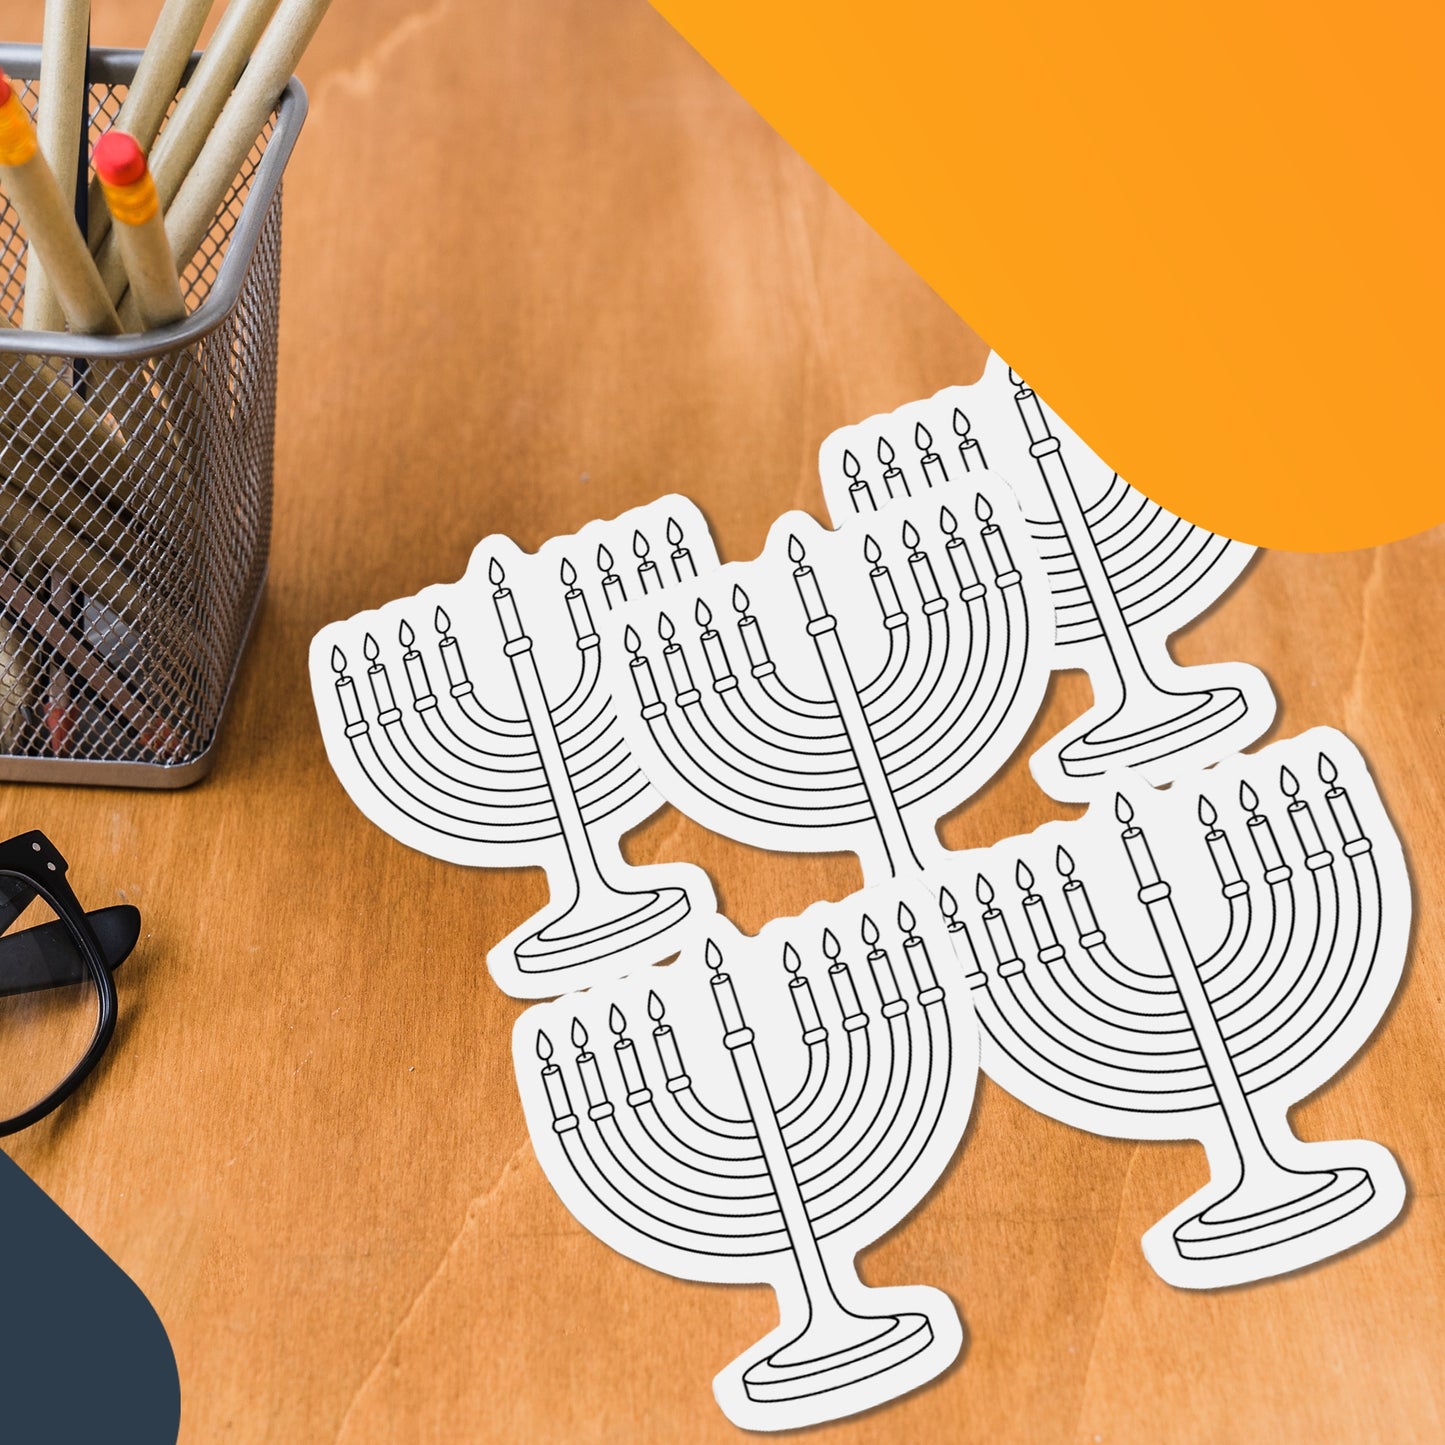 Color Your Own Hanukkah Menorah Magnets, a Great DIY for You or to Share with Friends, Decorate 5 Magnetic Menorah Holiday Refrigerator Magnets